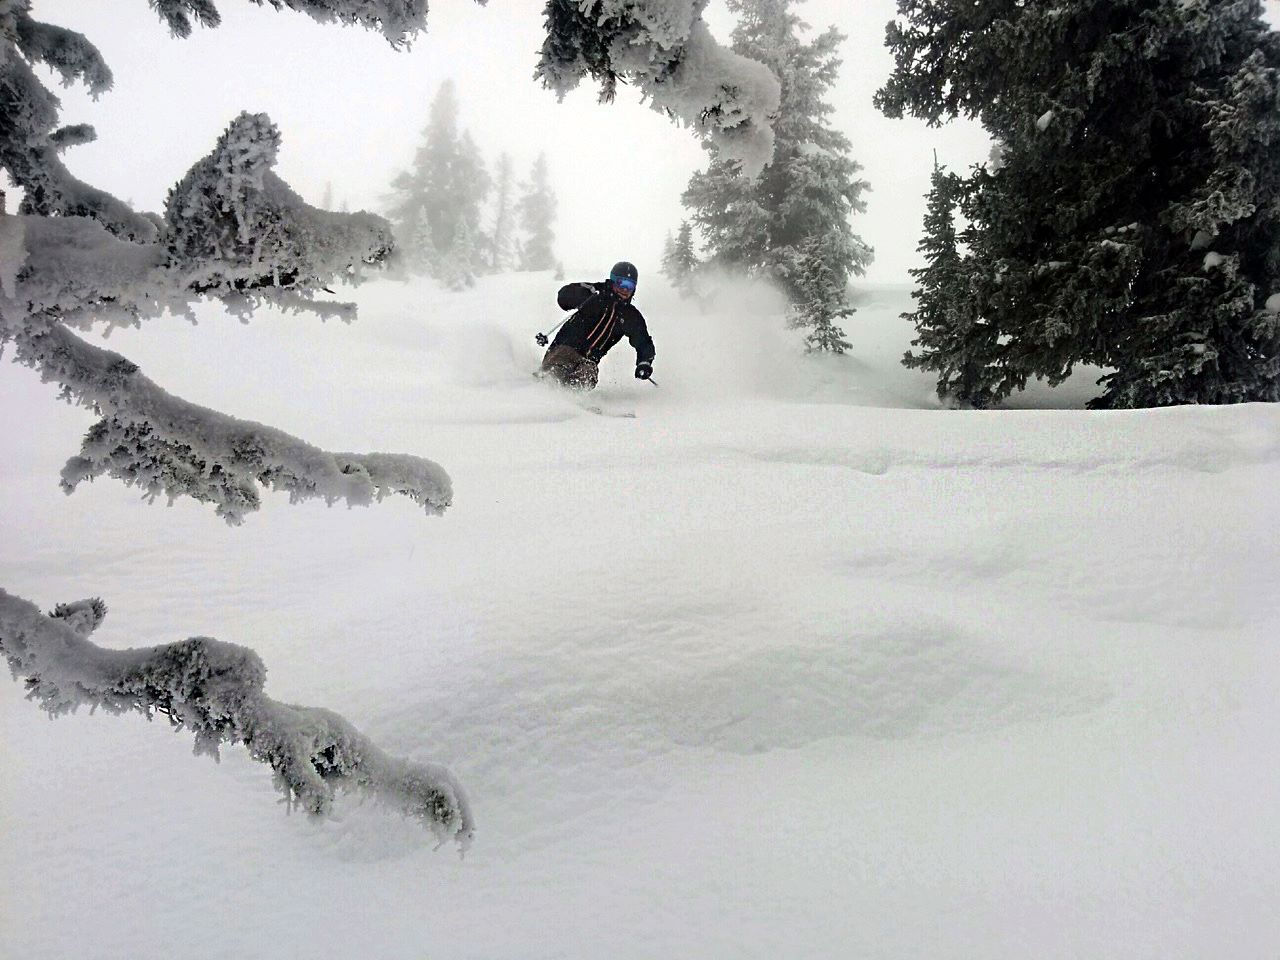 "It's a cool whip day out there with 4 inches of new snow - Targhee style! Enjoy your President's Day turns!" - Grand Tarhgee, WY today